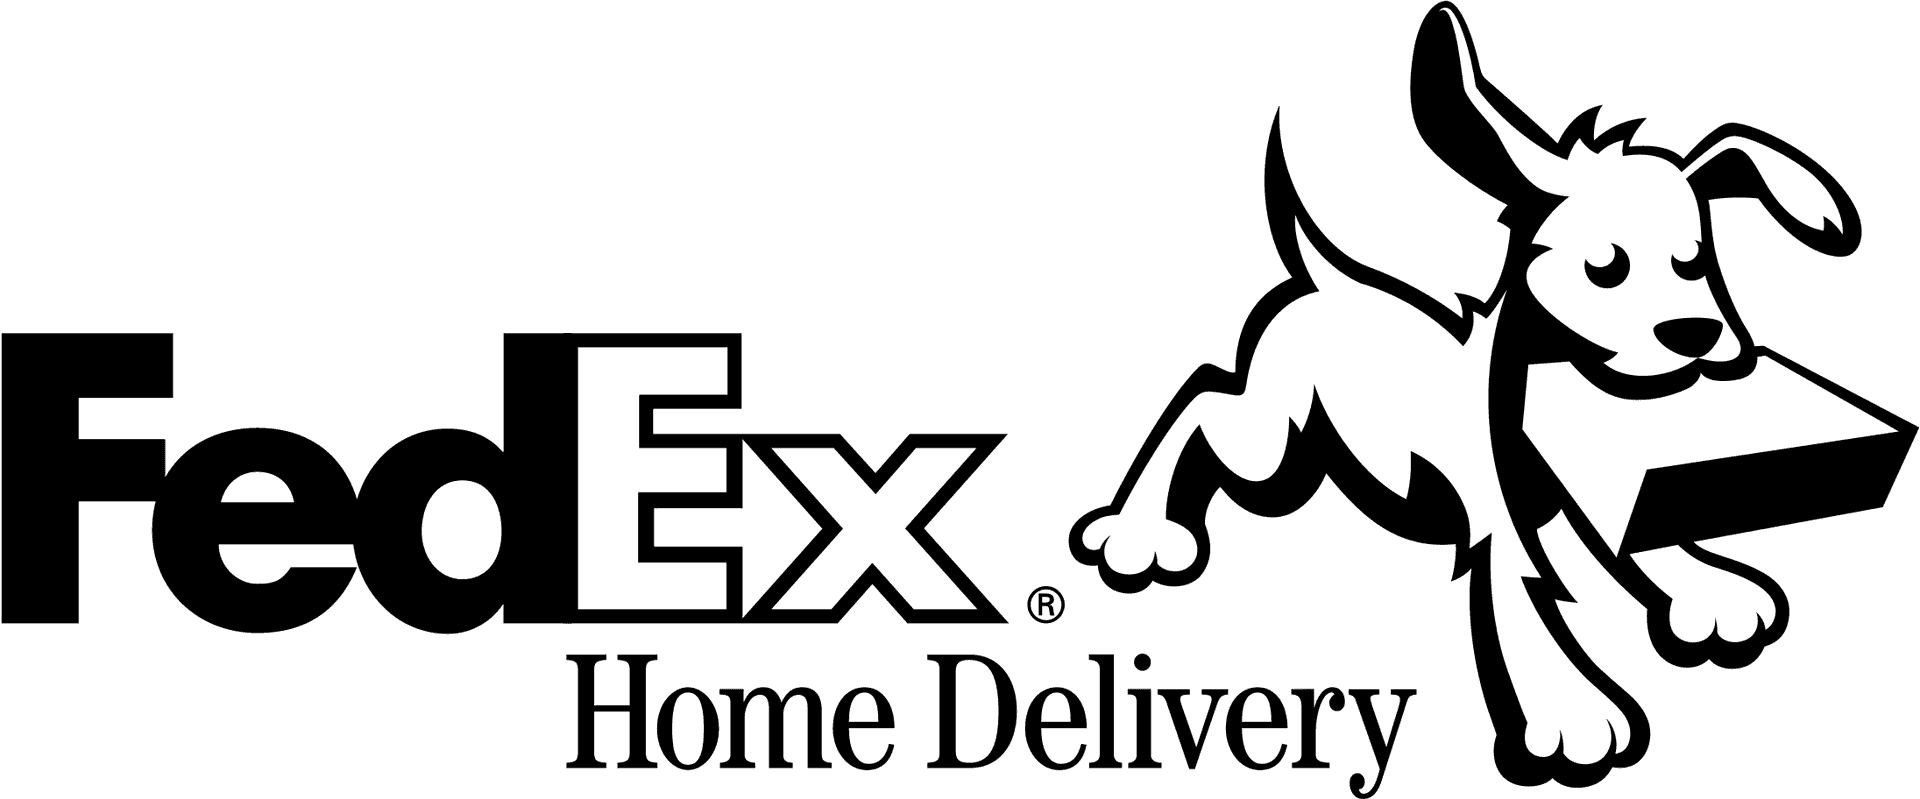 Fed Ex Home Delivery Logowith Dog PNG